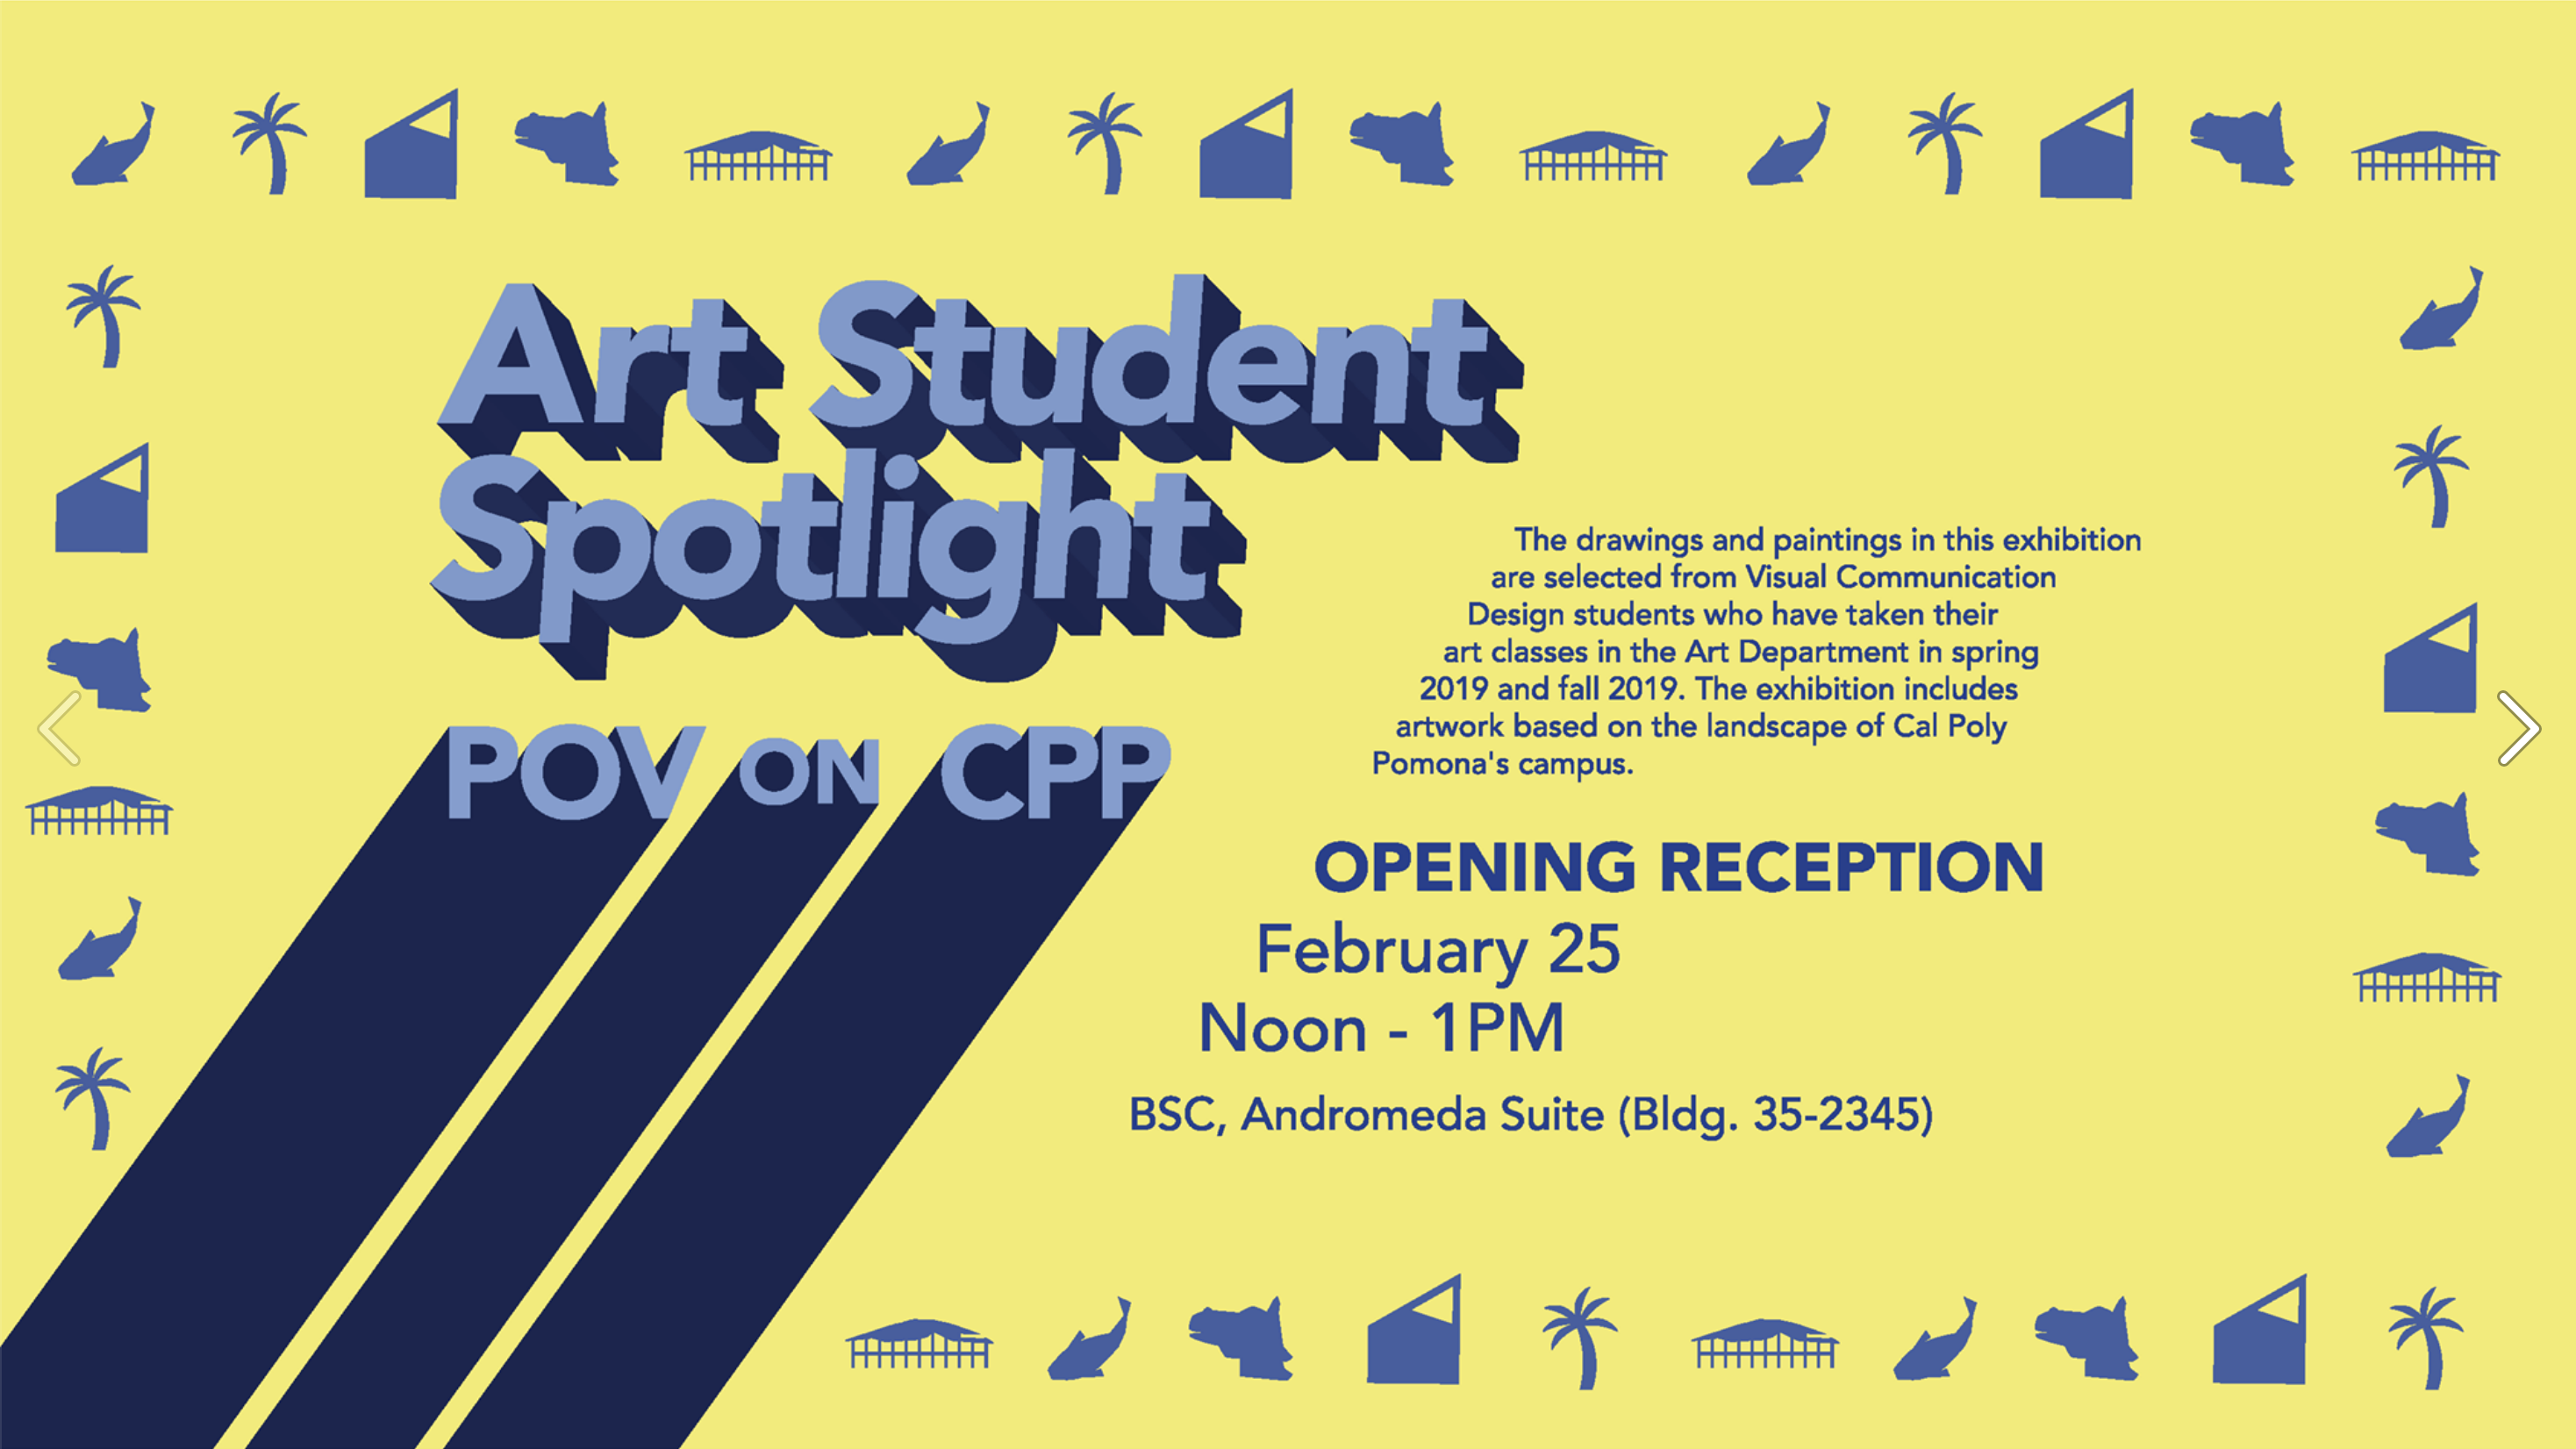 Art Student Spotlight.  POV on CPP.  The drawings and paintings in this exhibition are selected from Visual Communication Design students who have taken their art classes in the Art Department in spring 2019, and fall 2019.  The exhibition includes artwork based based on the landscape of Cal Poly Pomona's campus.  Opening Reception February 25.  Noon - 1PM.  BSC, Andromeda Suite (Bldg. 35-2345)